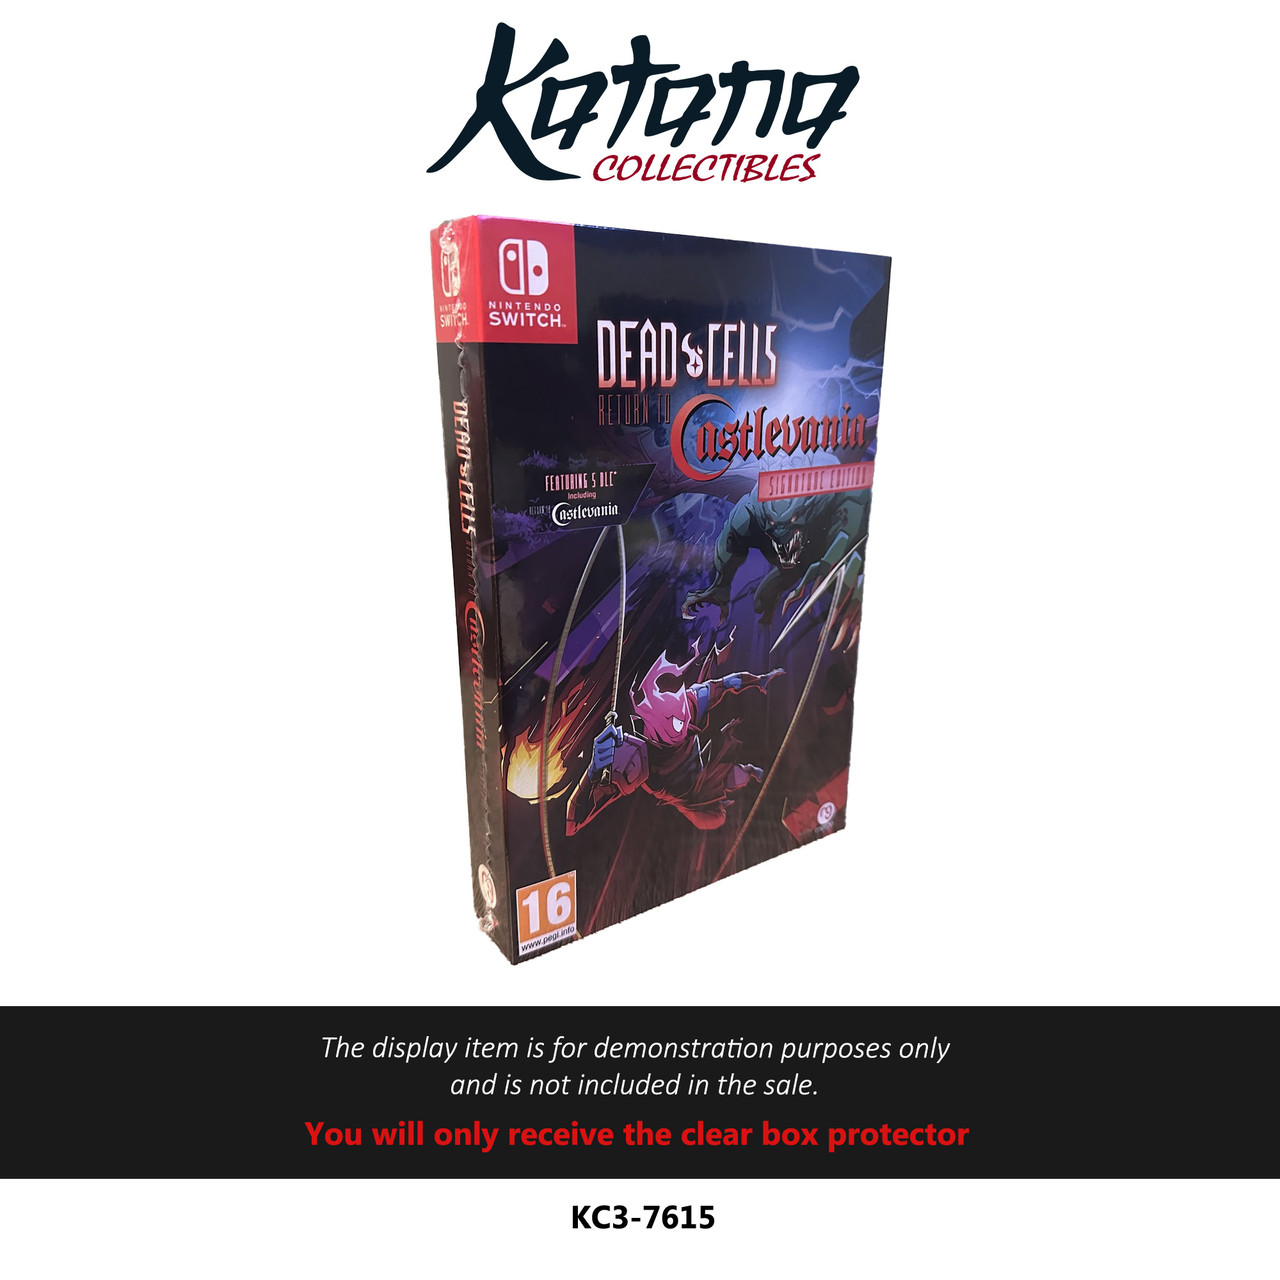 Katana Collectibles Protector For Dead Cells : Return to Castlevania - Signature Edition